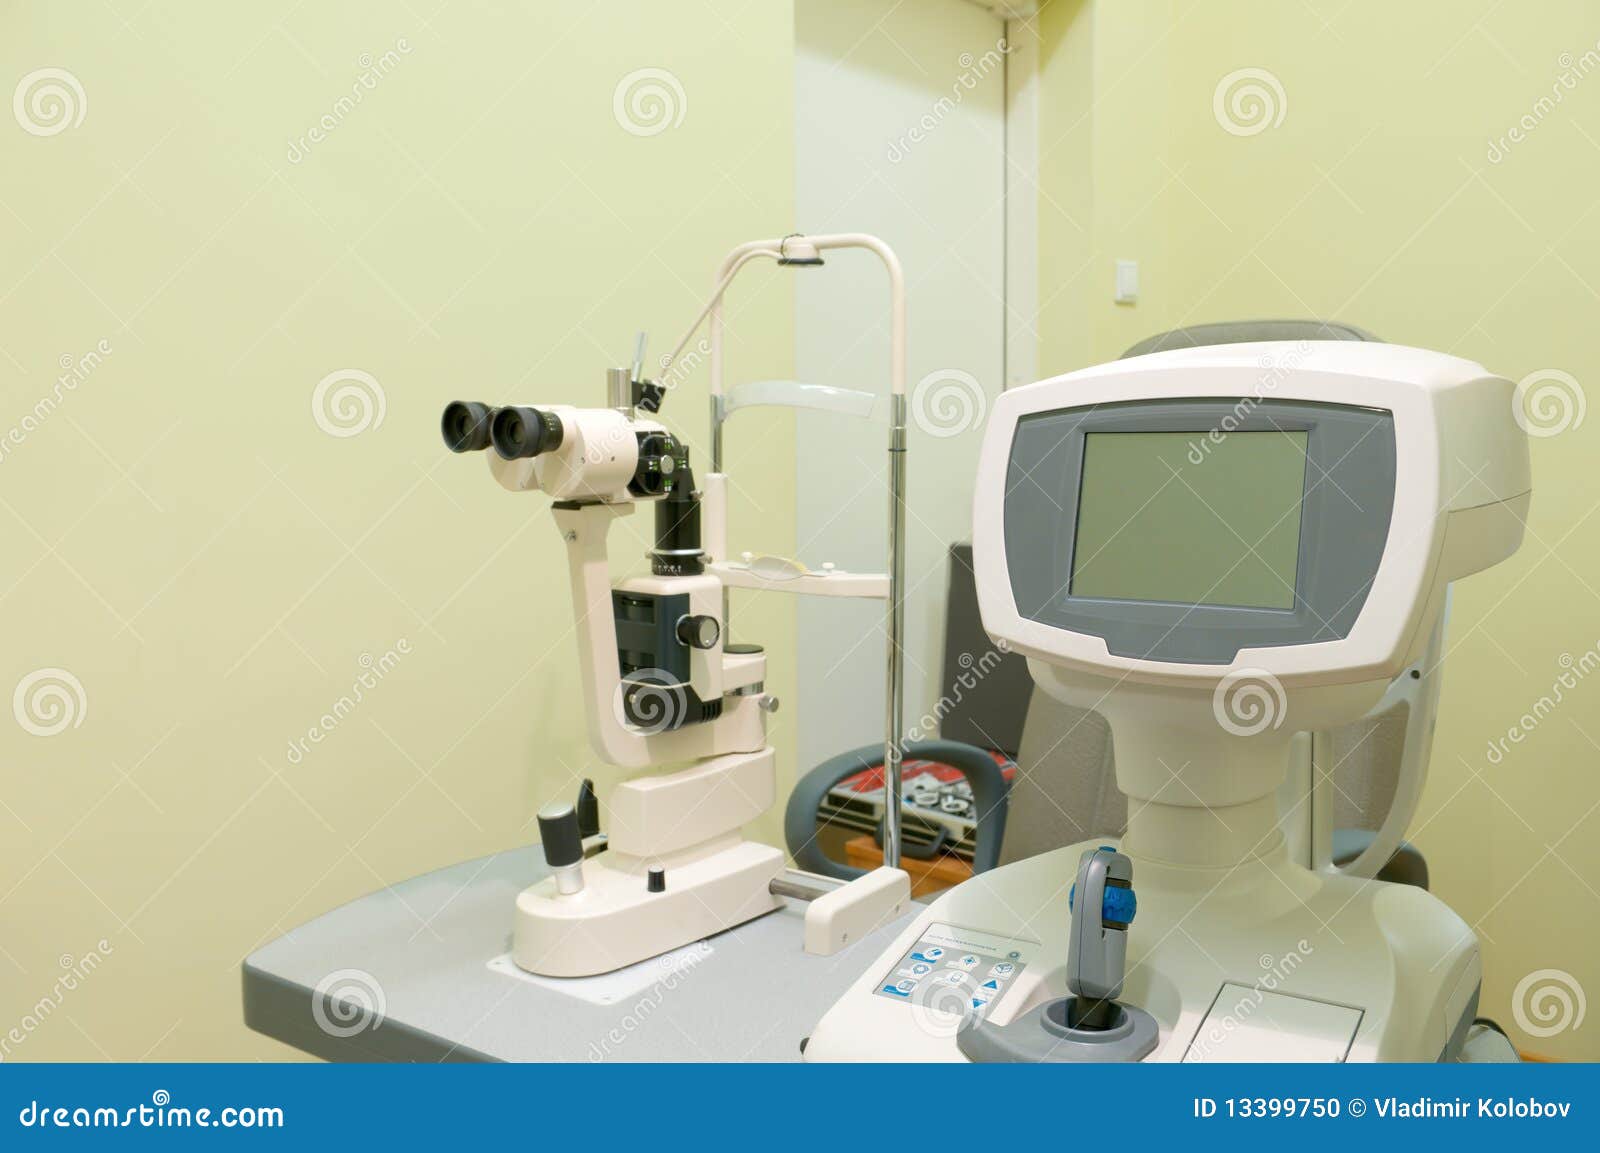 ophthalmic computer equipment.